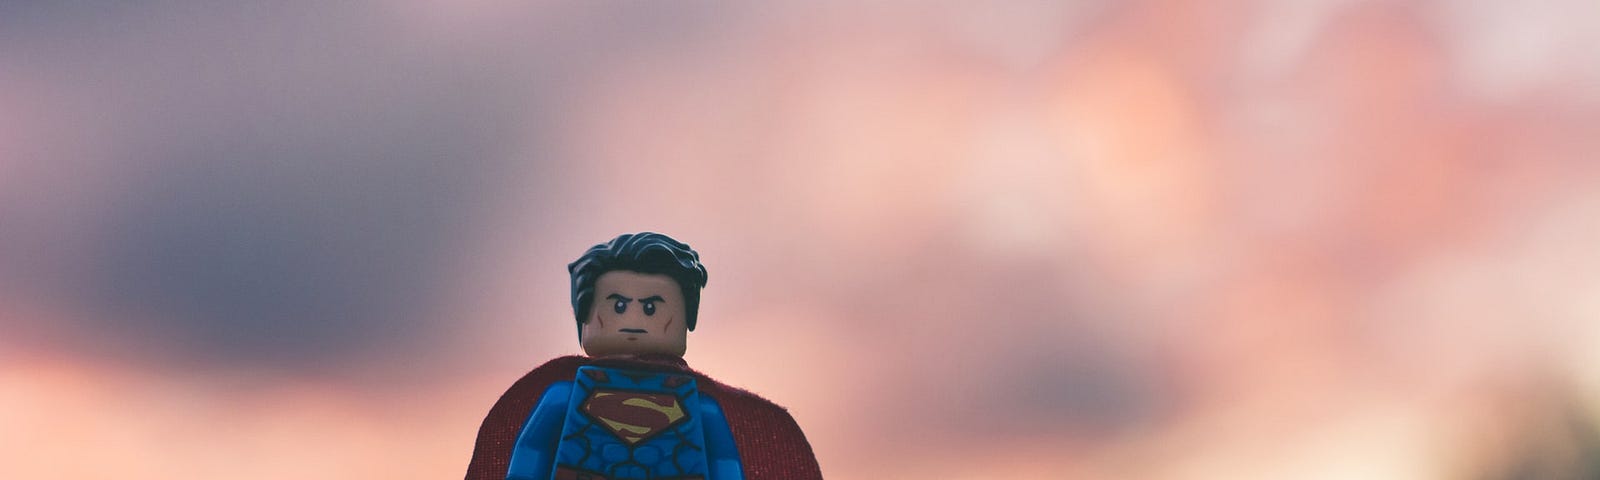 Closeup photo of a tiny Lego superman micro action figure, posed on top of what looks like a stump or wooden post, with a blurred background of sunset-or sunrise-tinted clouds behind